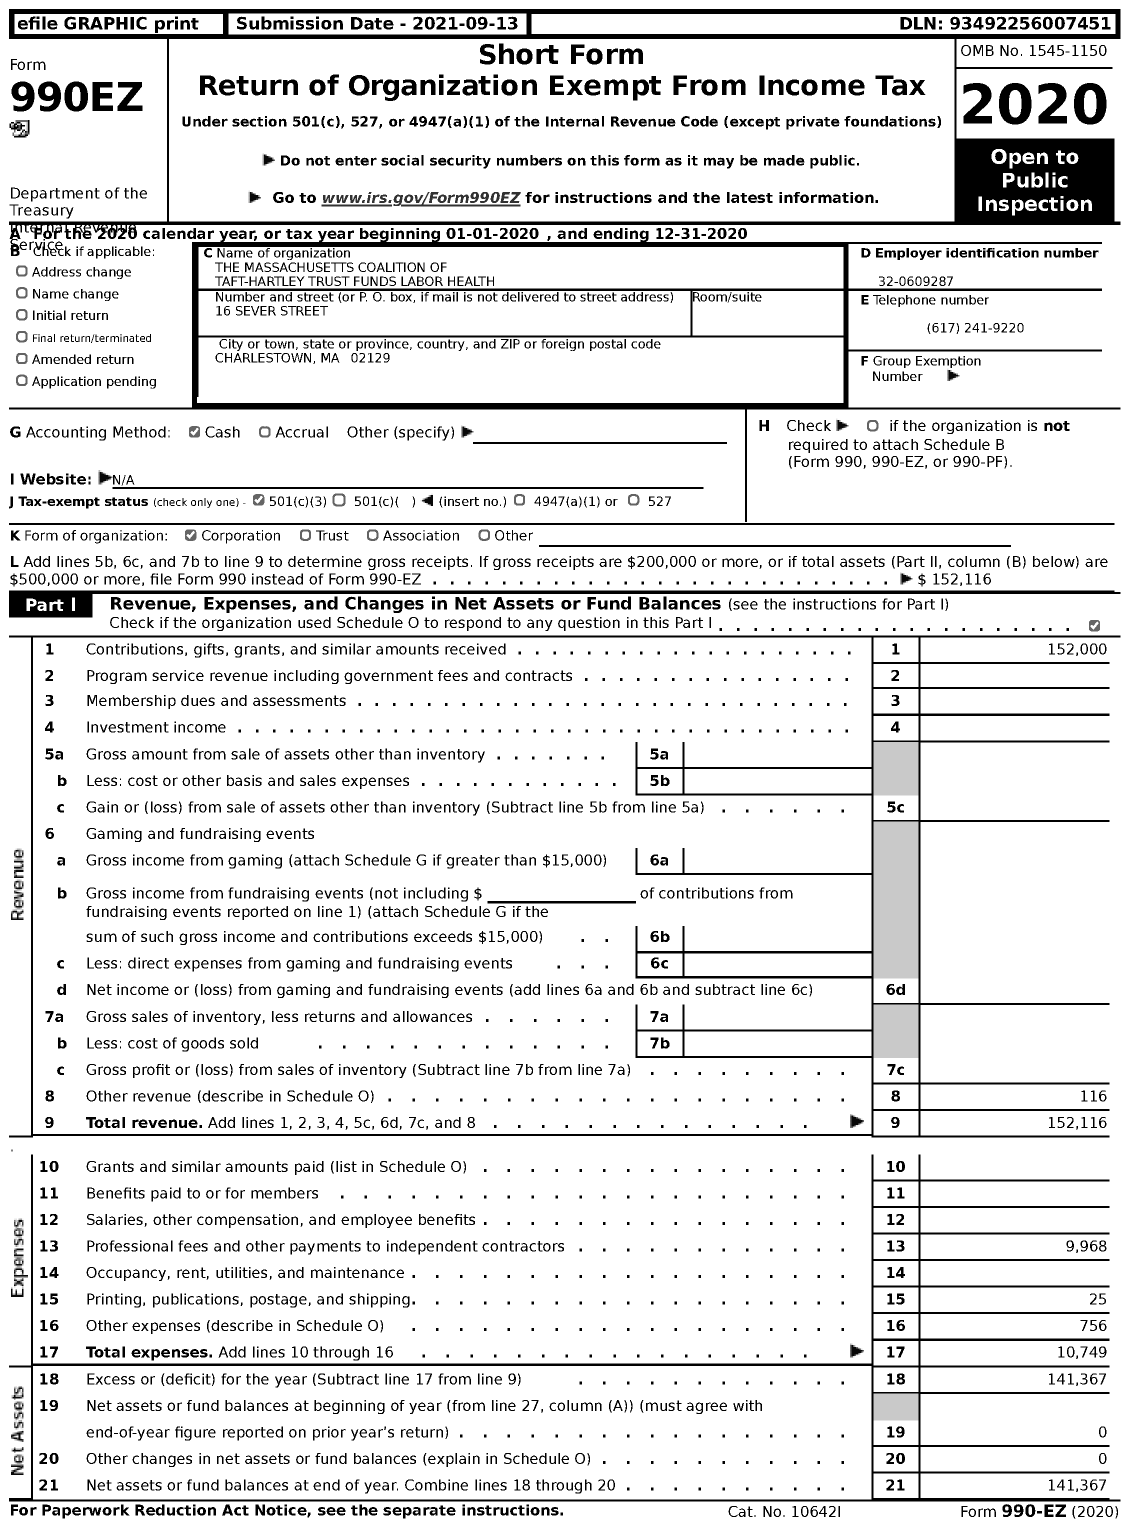 Image of first page of 2020 Form 990EZ for The Massachusetts Coalition of Taft-Hartley Trust Funds Labor Health